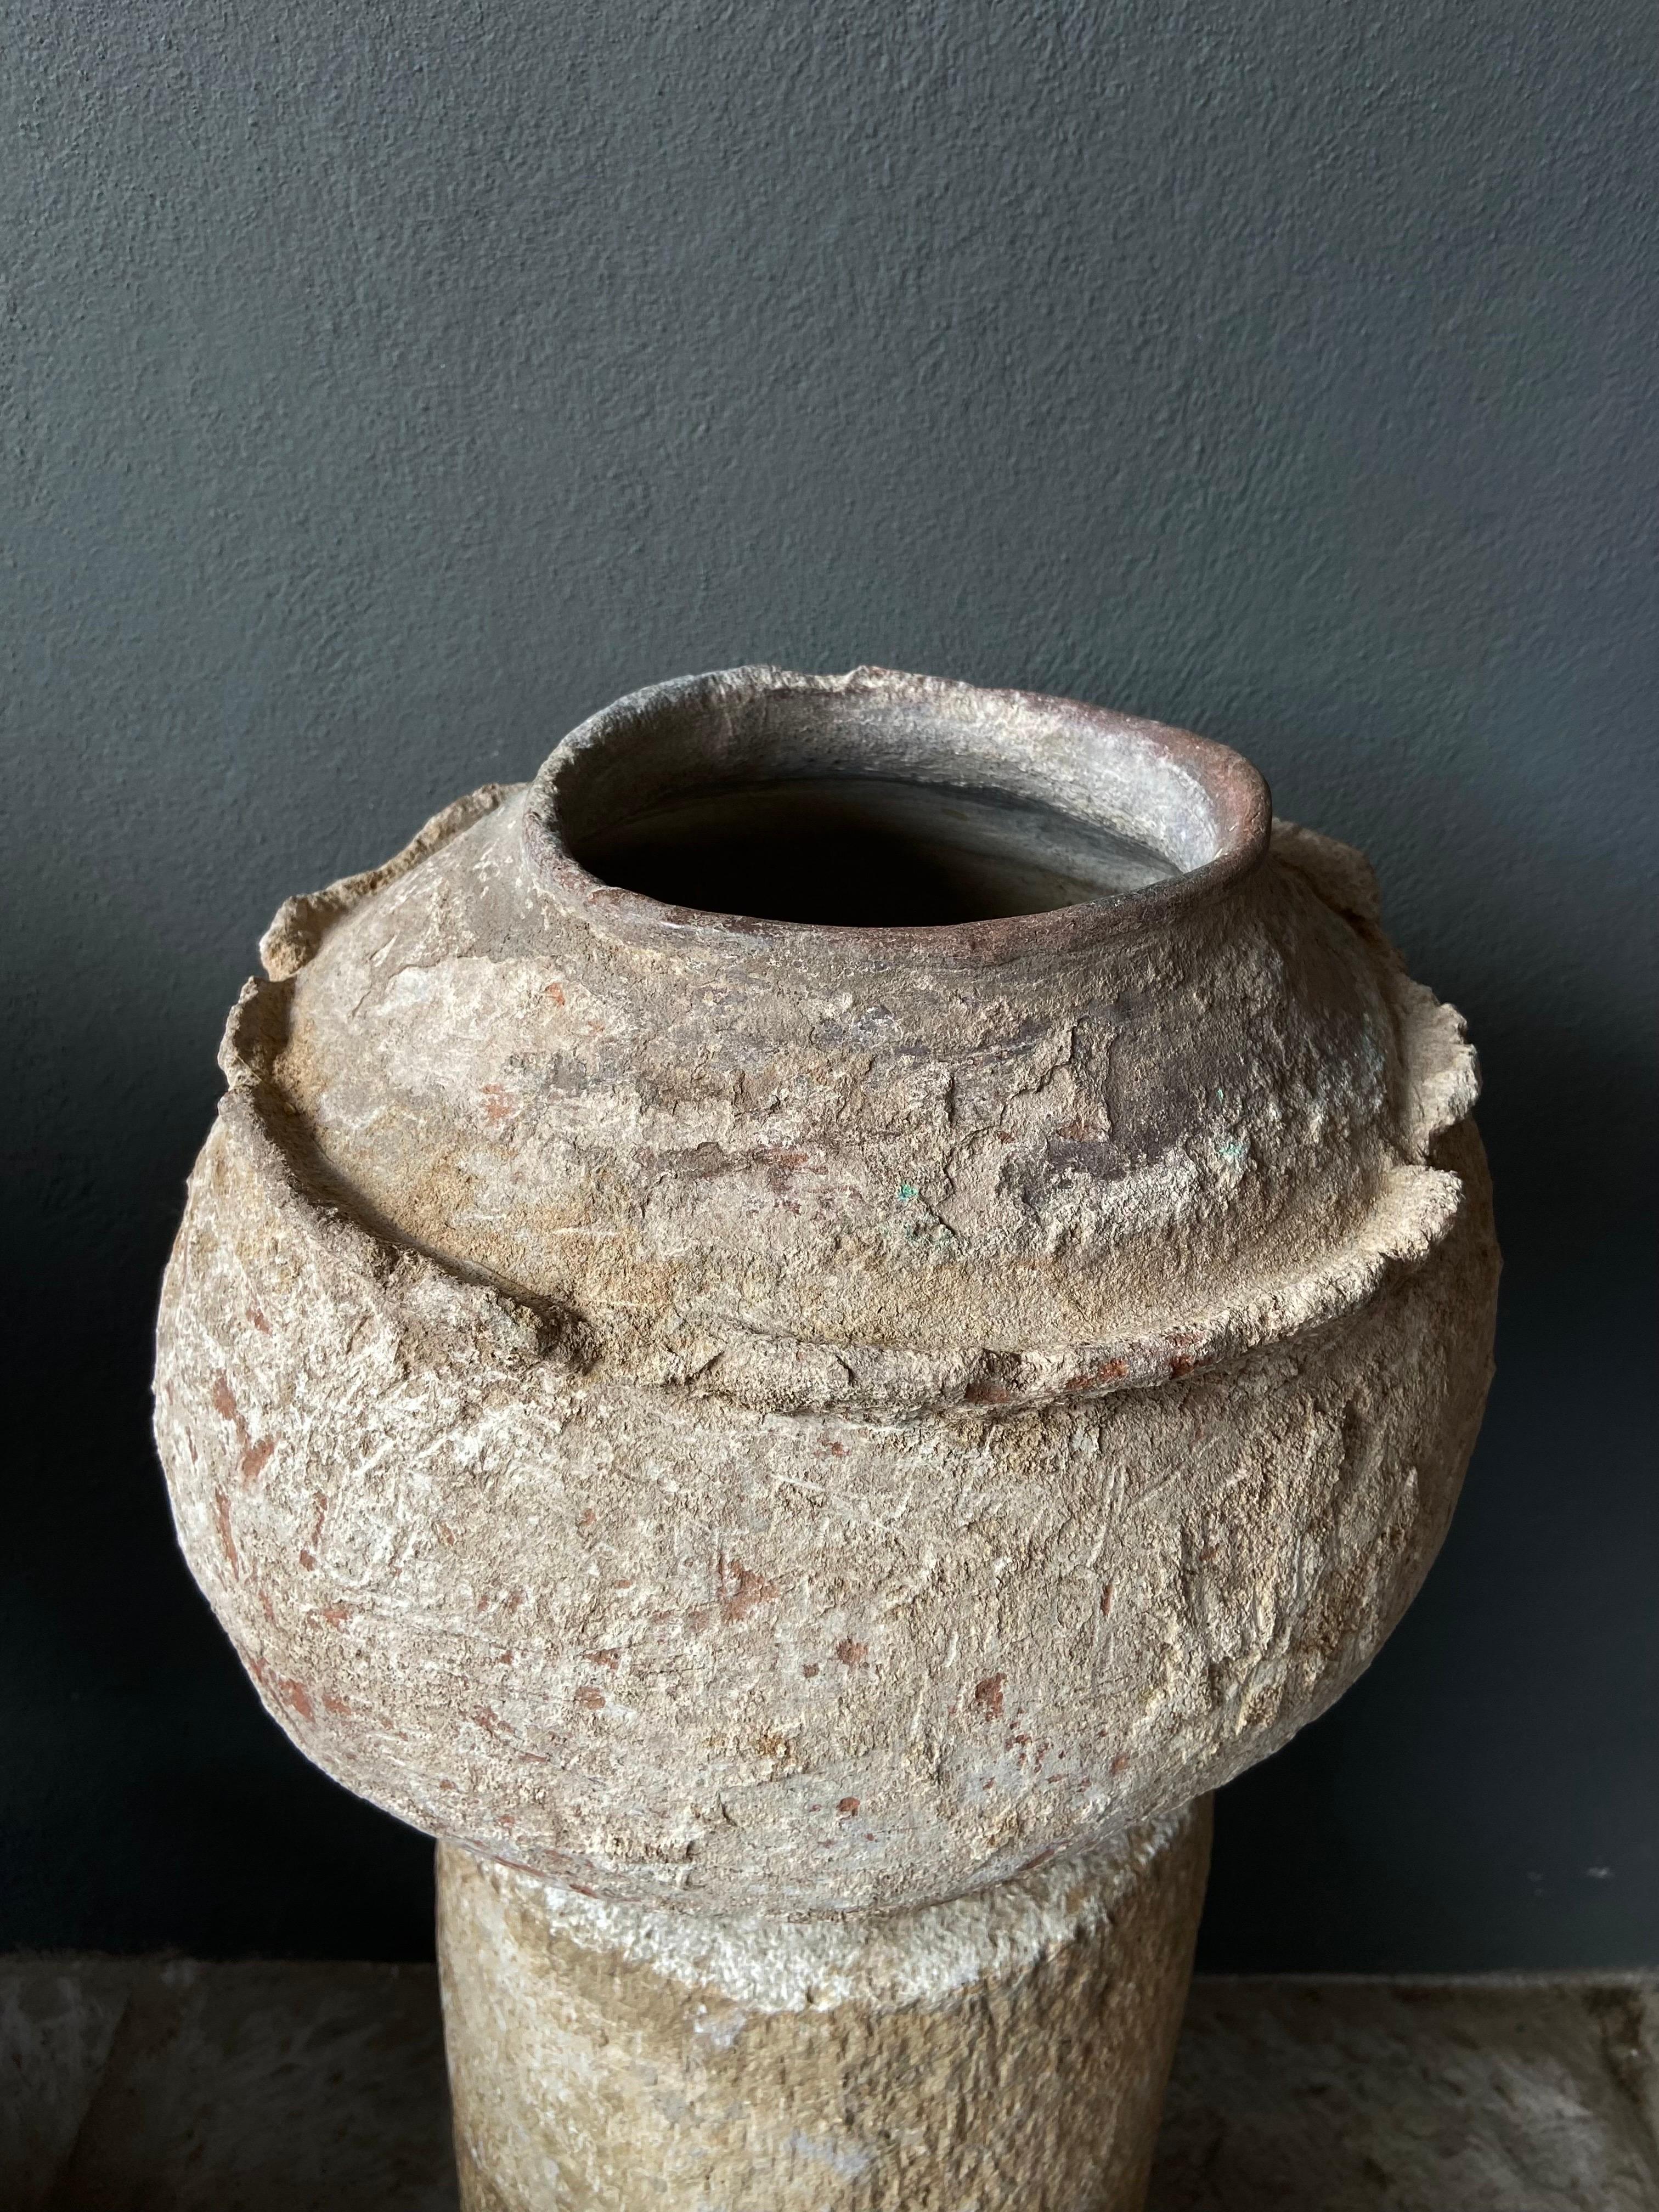 Fired Early 20th Century Primitive Terracotta Water Vessel from Mexico